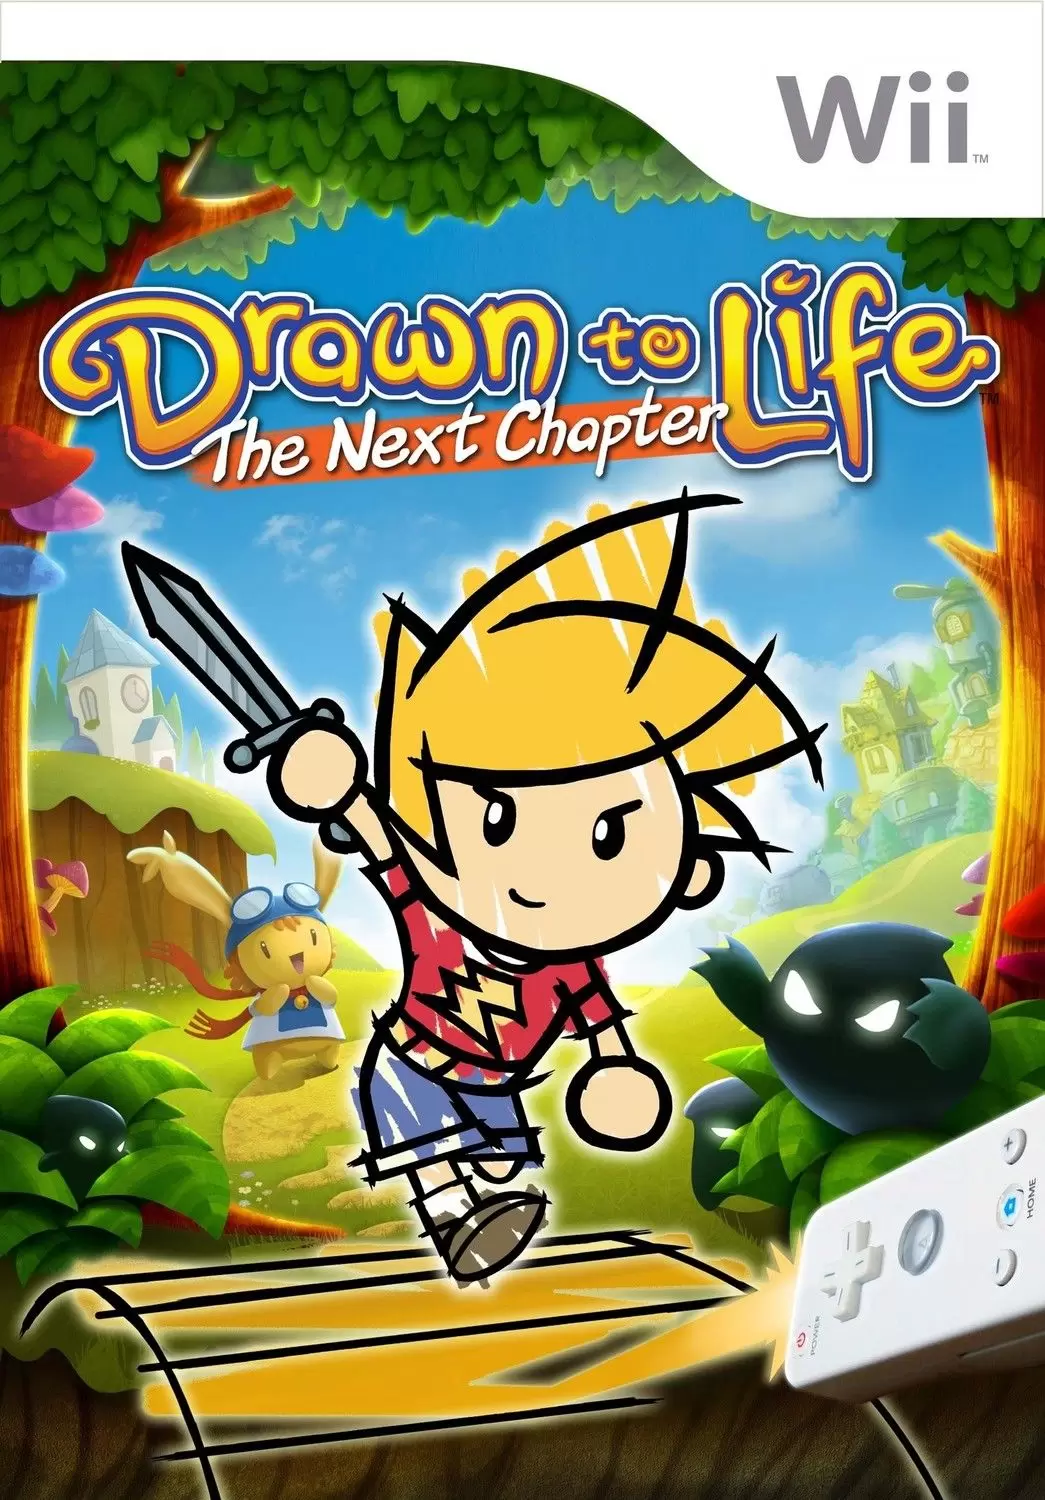 Nintendo Wii Games - Drawn to Life: the Next Chapter